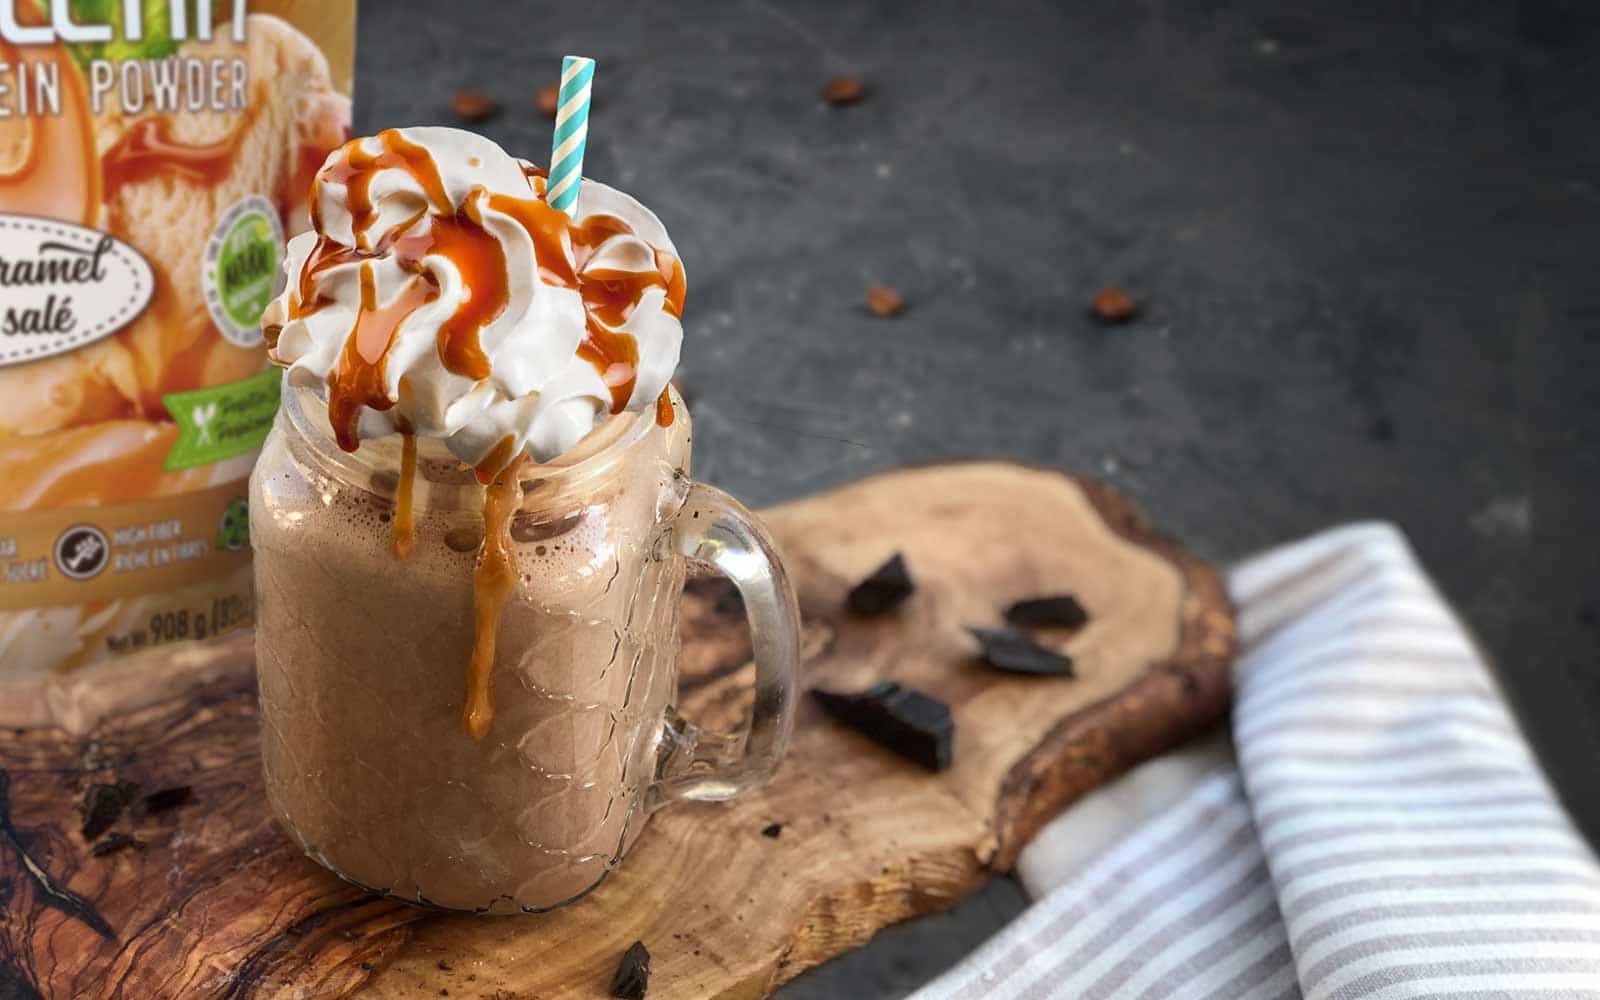 Salted Caramel Chocolate Smoothie - Nutracelle